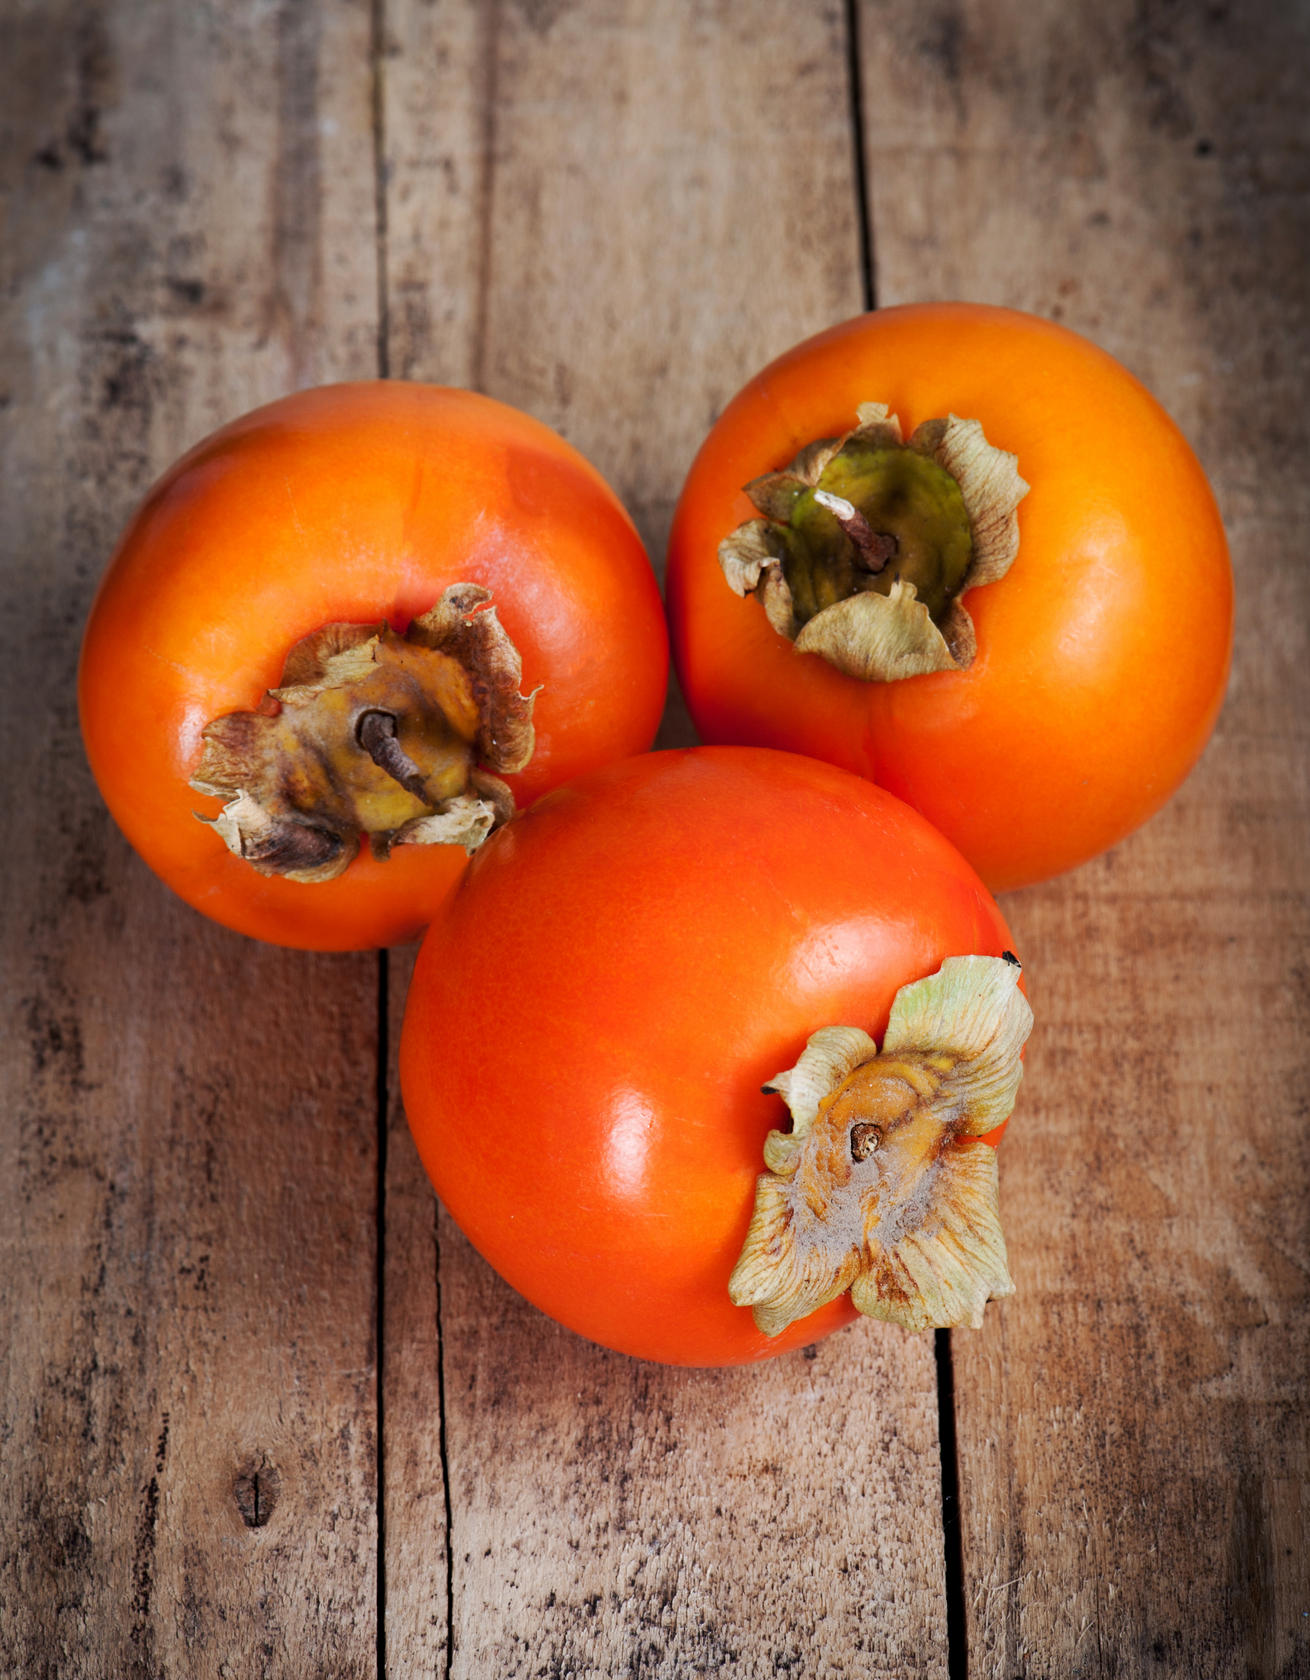 The persimmon was popular with geishas for its many beauty benefits.